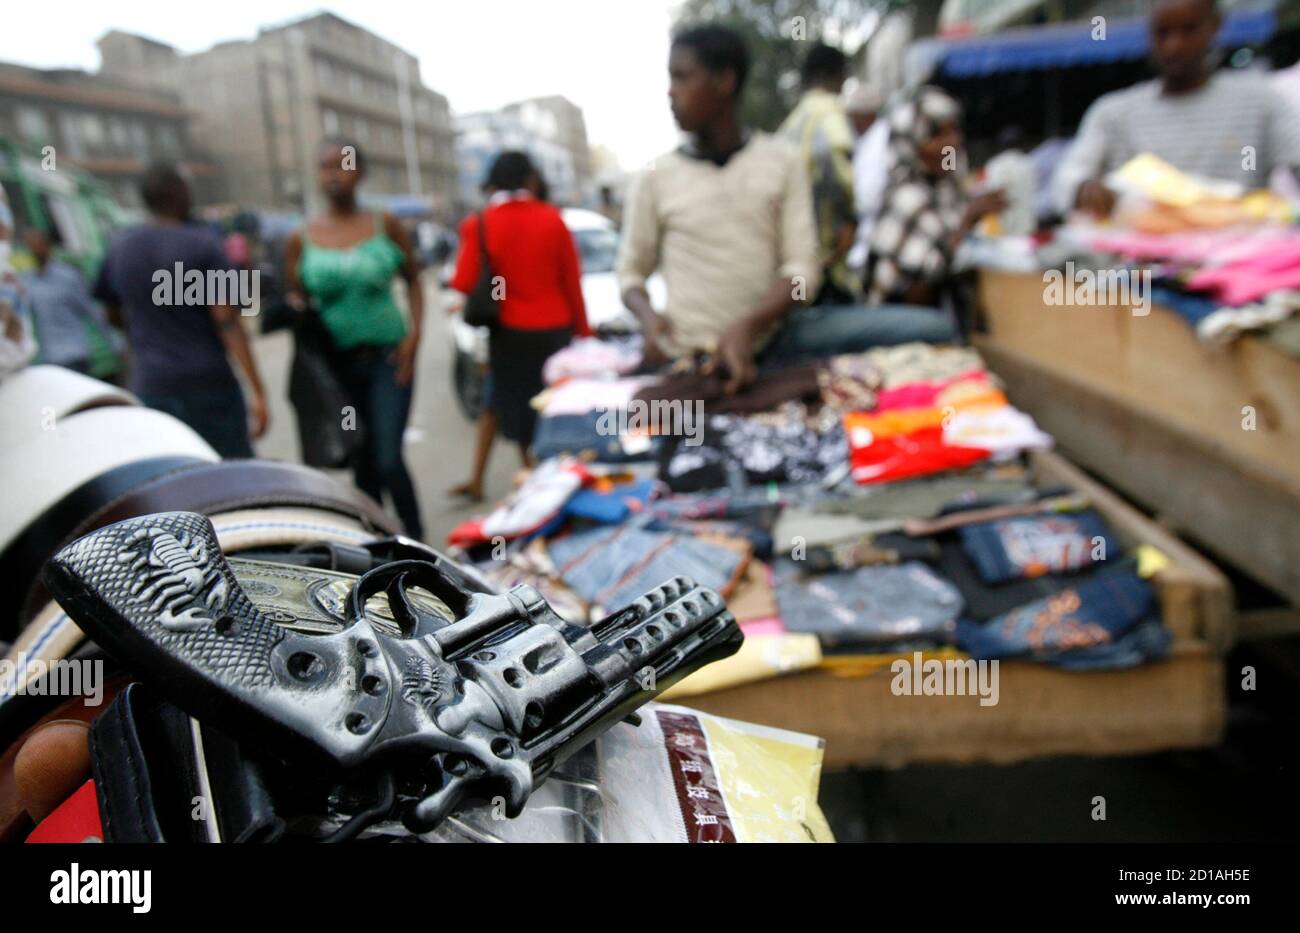 A belt buckle, resembling a pistol, is seen for sale in the Eastleigh neighbourhood of Nairobi, June 25, 2009. The bustling Eastleigh suburb has been the hub of business for Kenyan-Somalis and thousands of refugees escaping civil war in neighbouring Somalia for decades. But as people flee the continuing conflict in Somalia, the population is outgrowing Eastleigh's 'Little Mogadishu' and Somalis are venturing into other parts of the city. Picture taken June 25, 2009. REUTERS/Thomas Mukoya (KENYA SOCIETY CONFLICT BUSINESS) Stock Photo